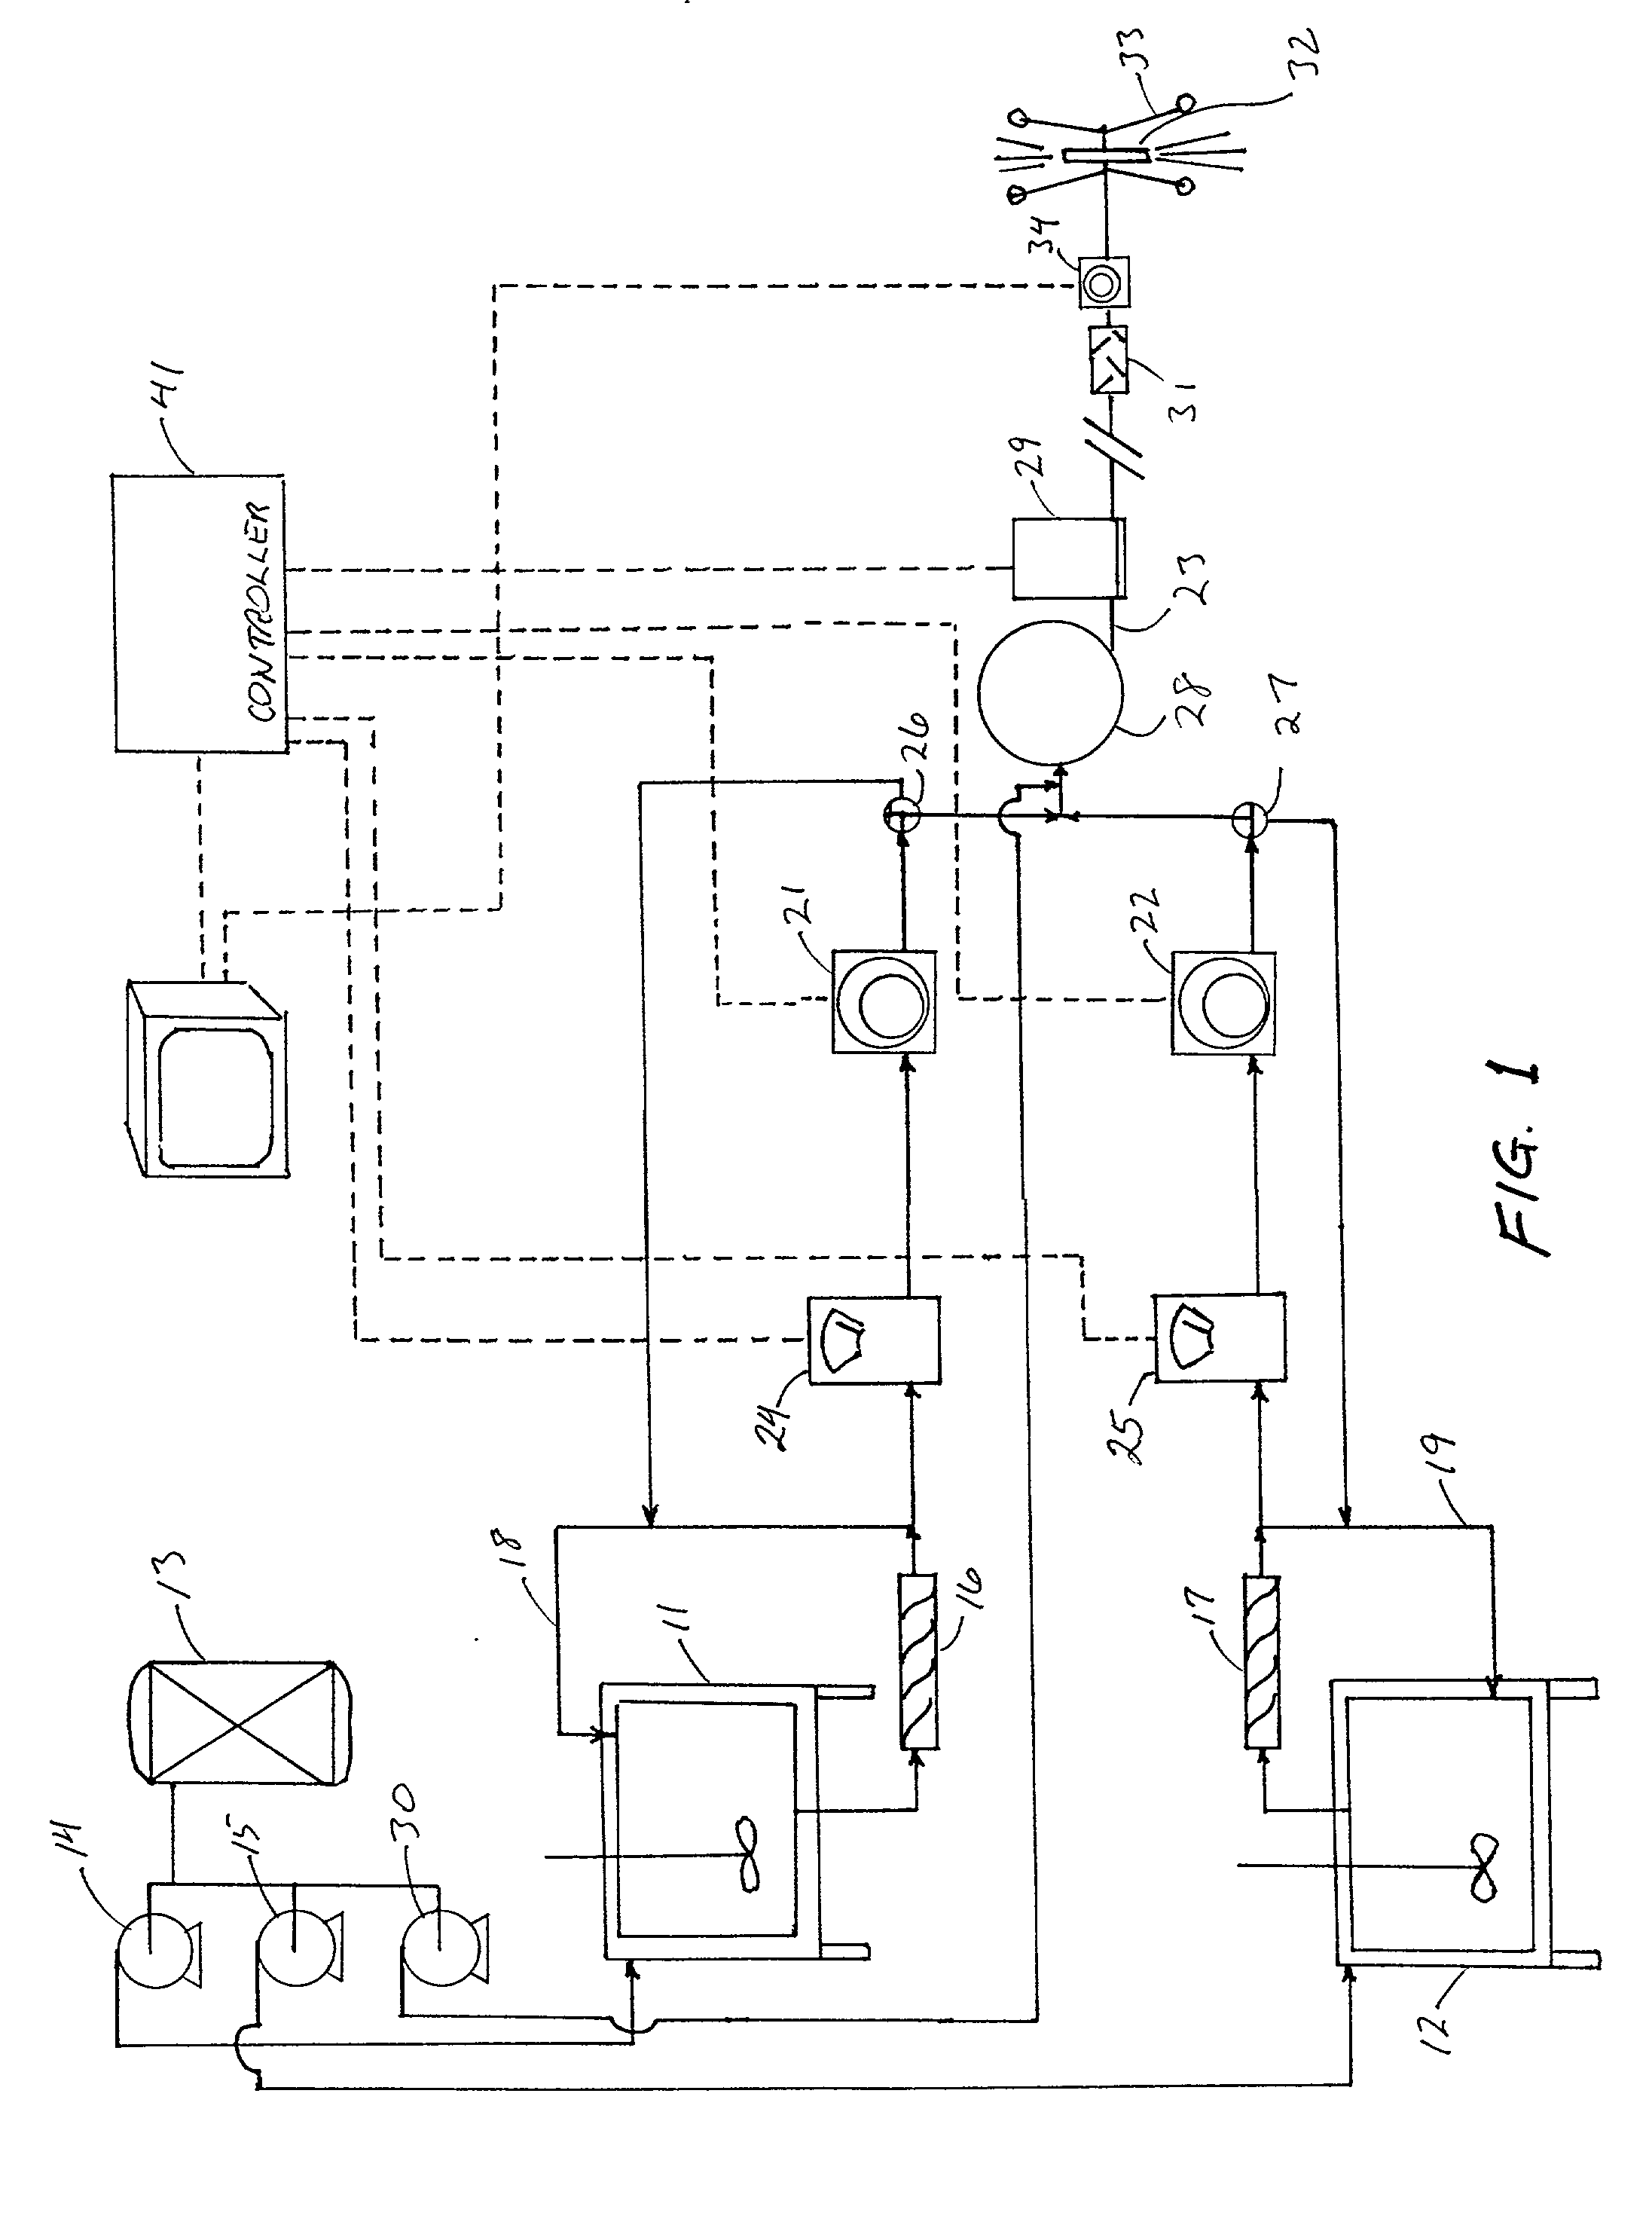 System and method for delivering reactive fluids to remote application sites